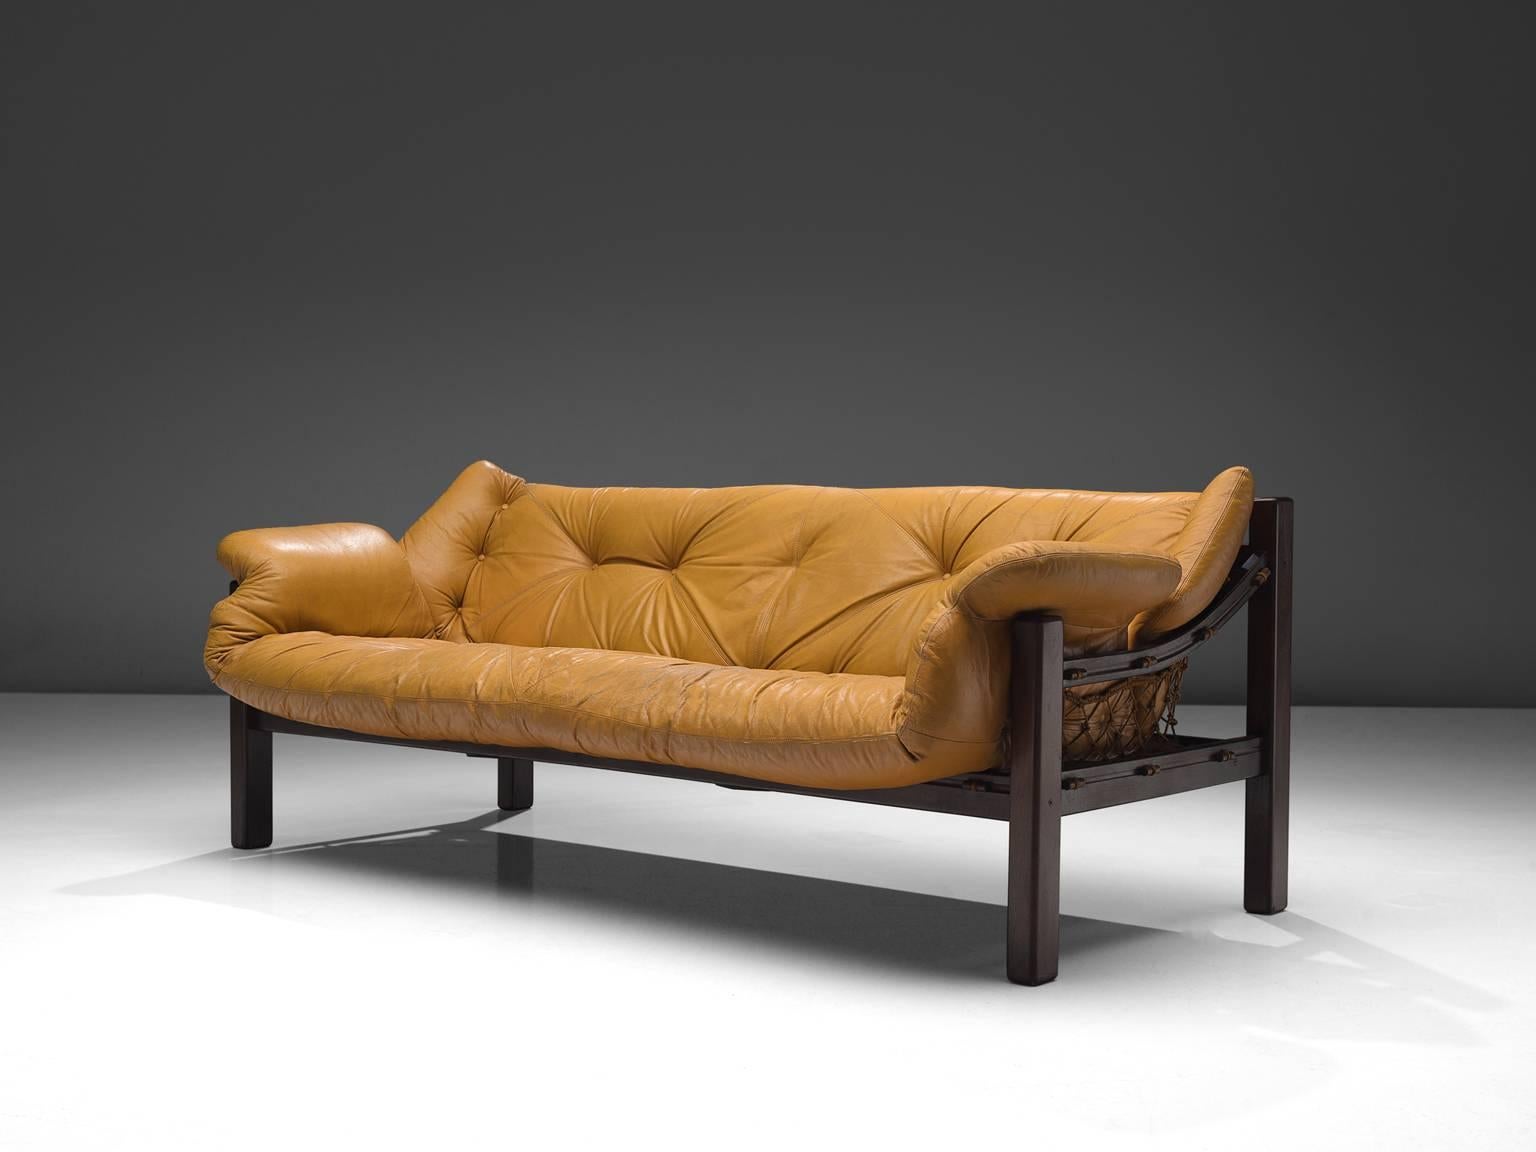 Jean Gillon for Italma, 'Amazonas' sofa, rosewood, yellow cognac leather, Brazil, 1968.

This robust and hefty sofa is designed by Jean Gillon. The originality of this Amazonas sofa comes from the concept of the body being captured by the piece of